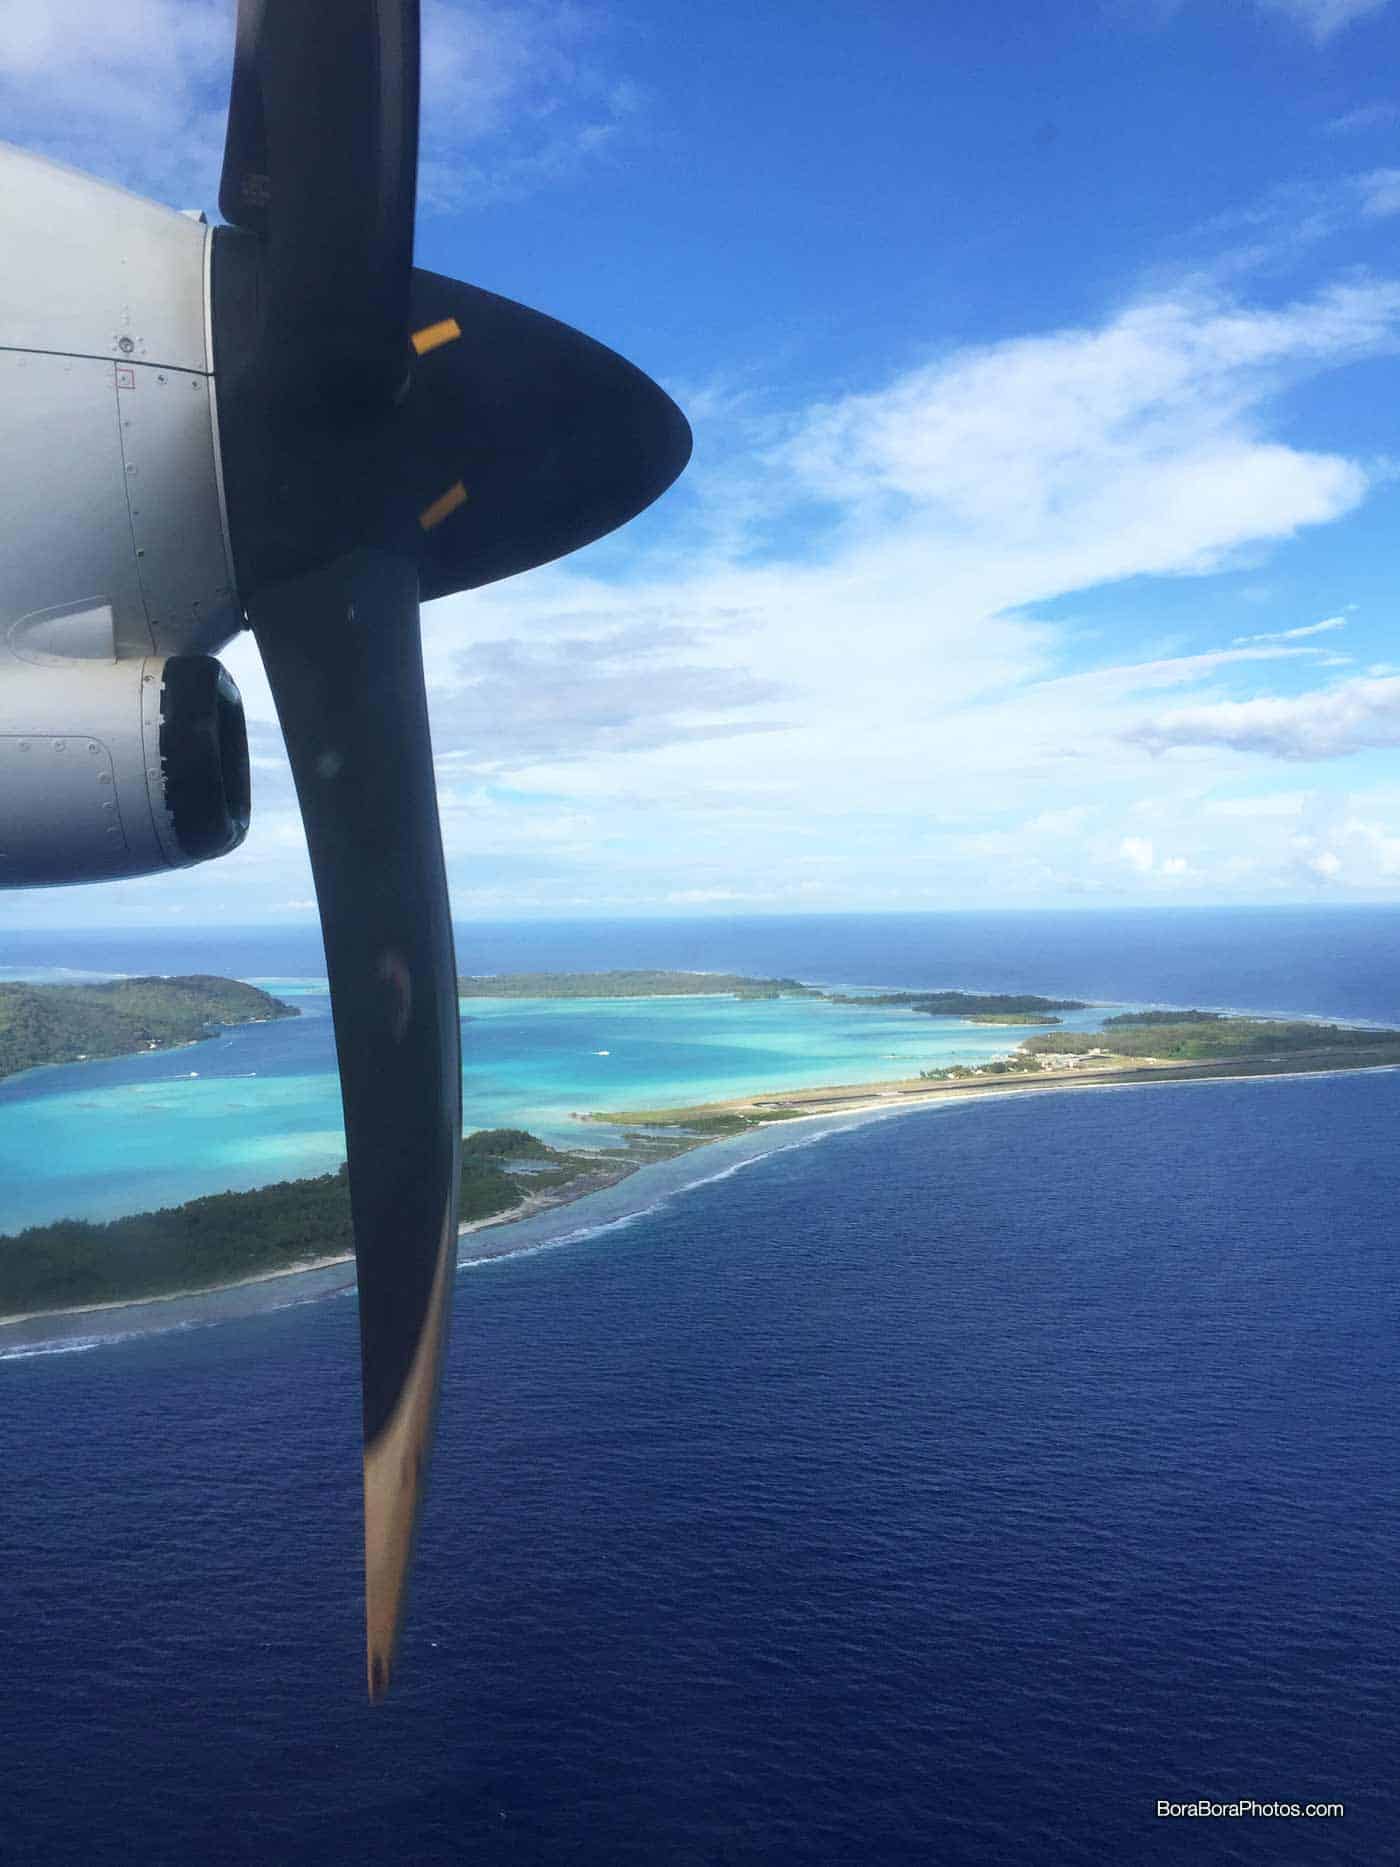 A view of Bora Bora airport from inside a plane